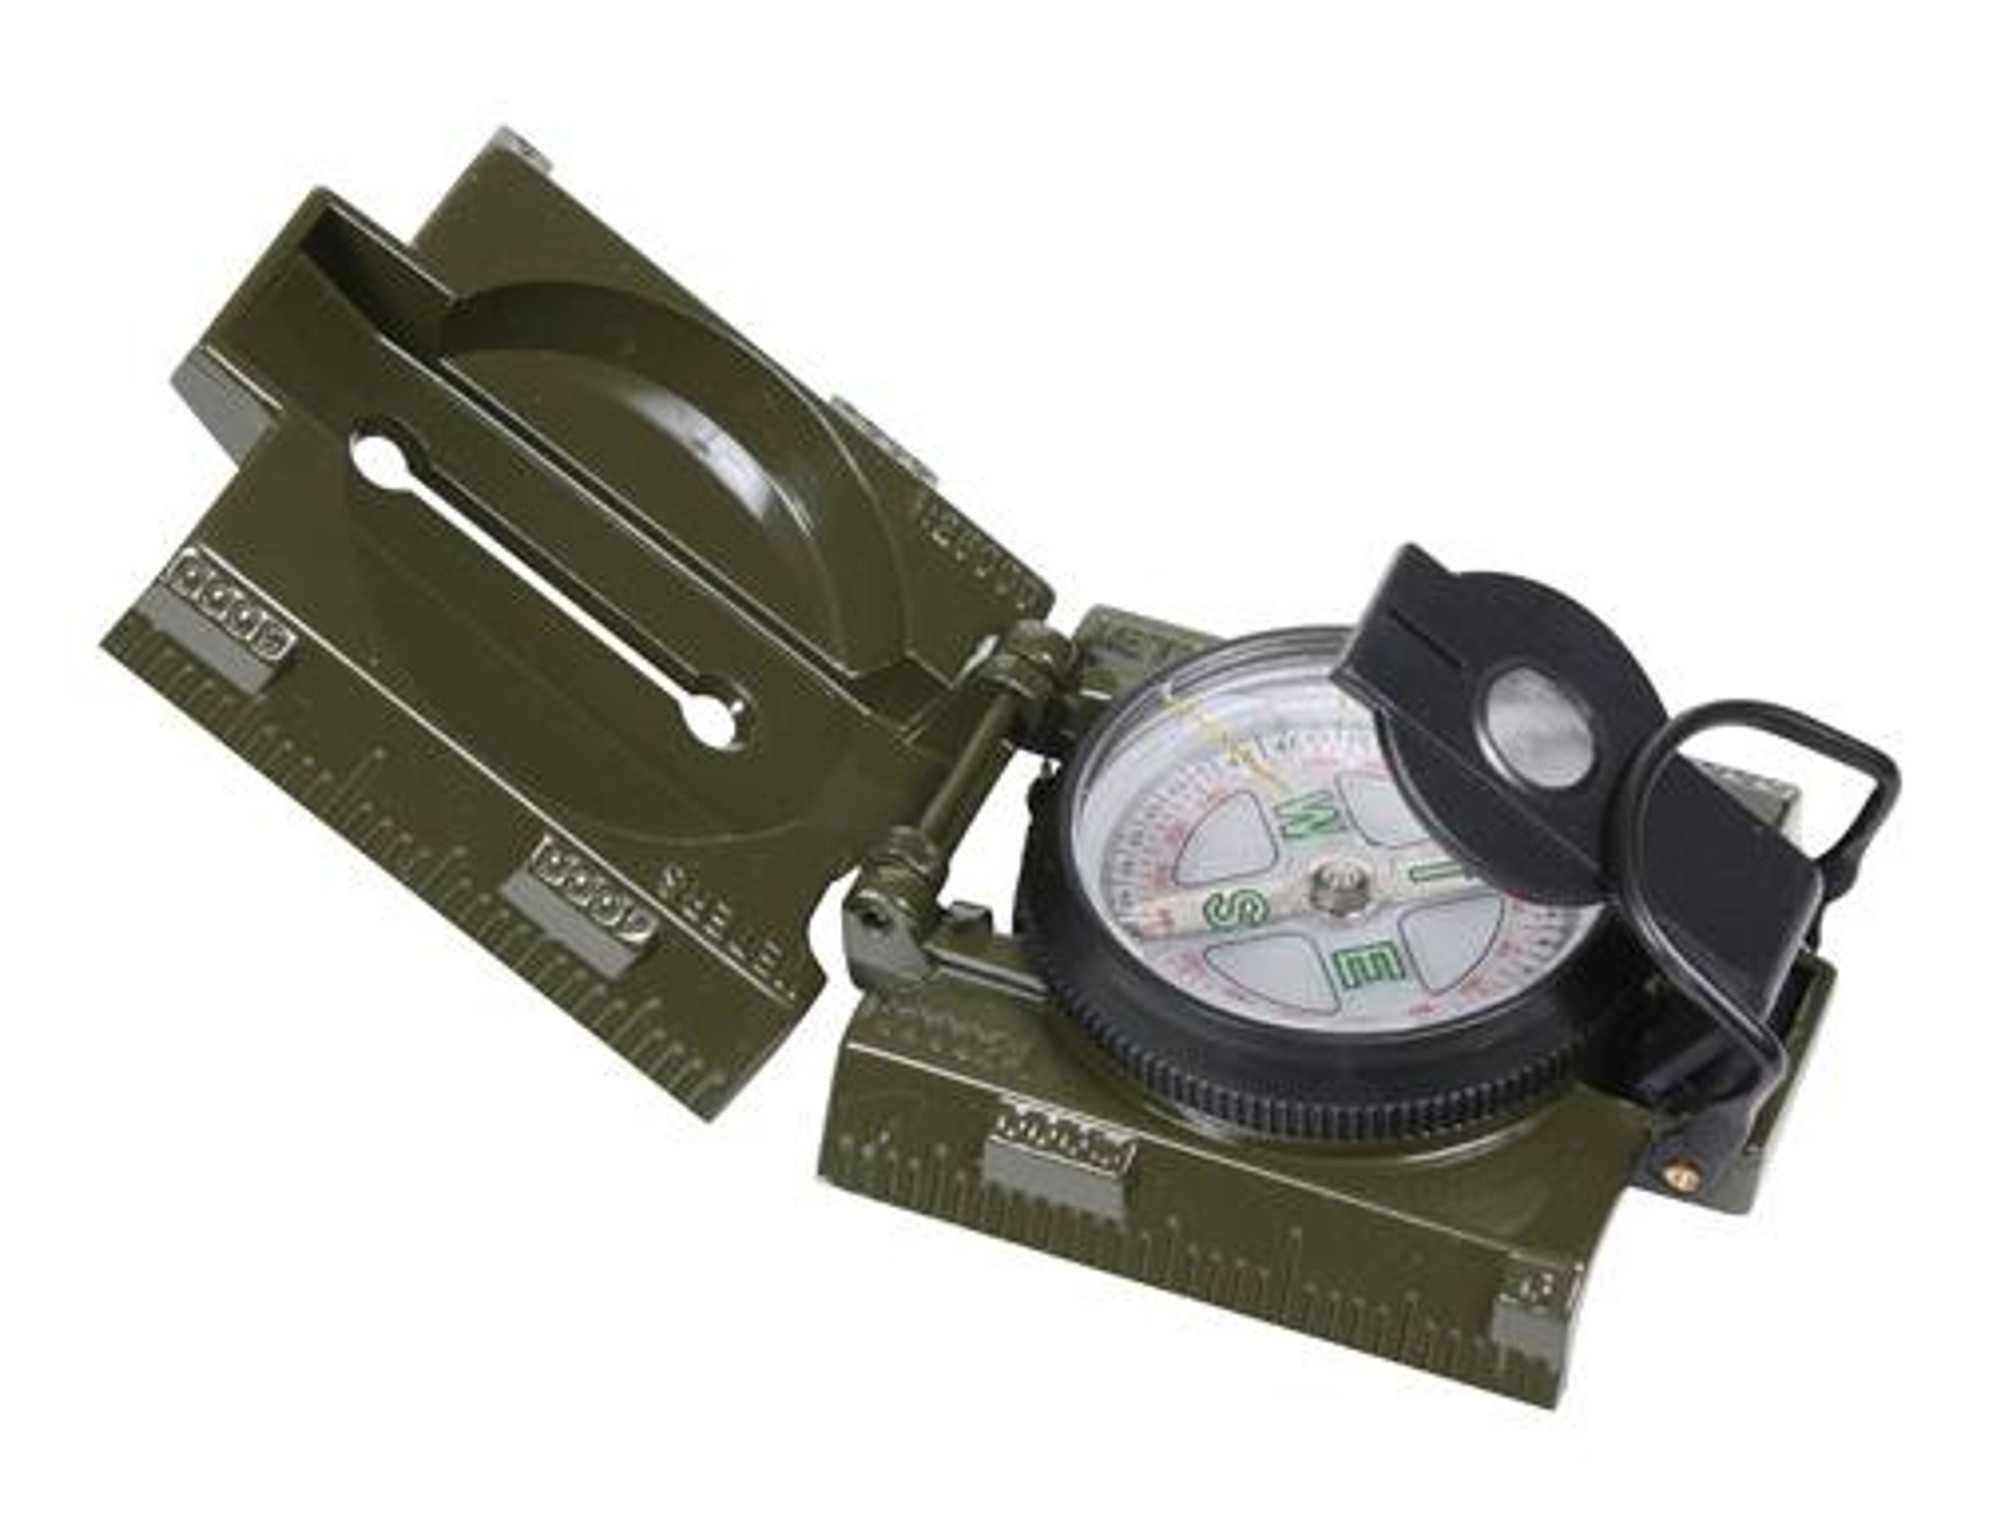 Rothco Military Marching Compass with LED Light - Olive Drab